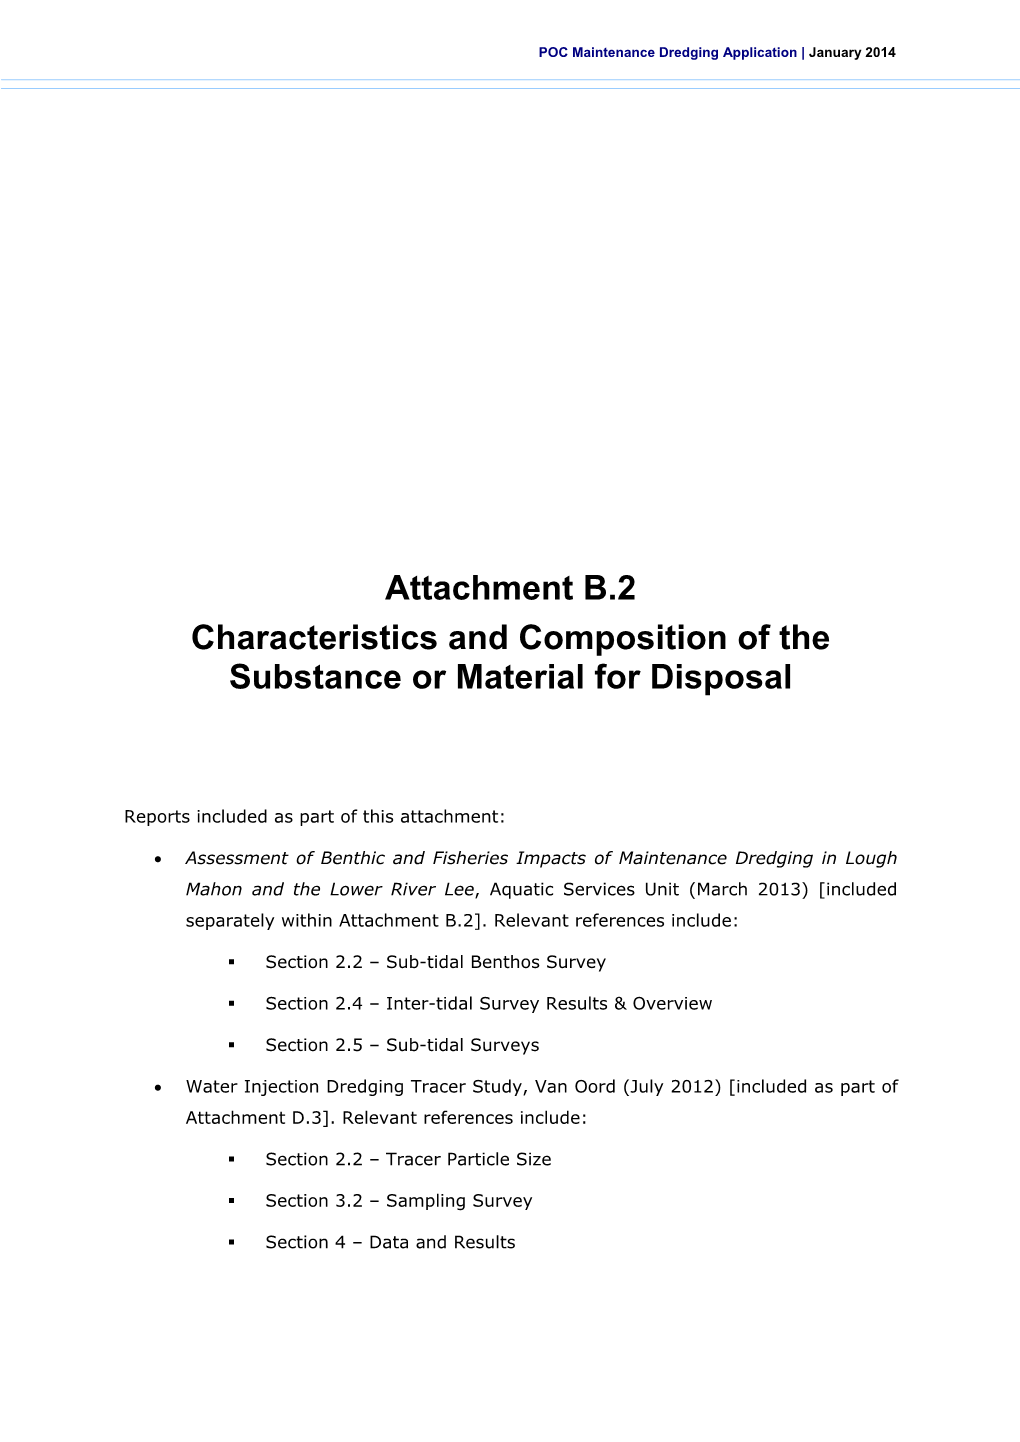 Attachment B.2 Characteristics and Composition of the Substance Or Material for Disposal